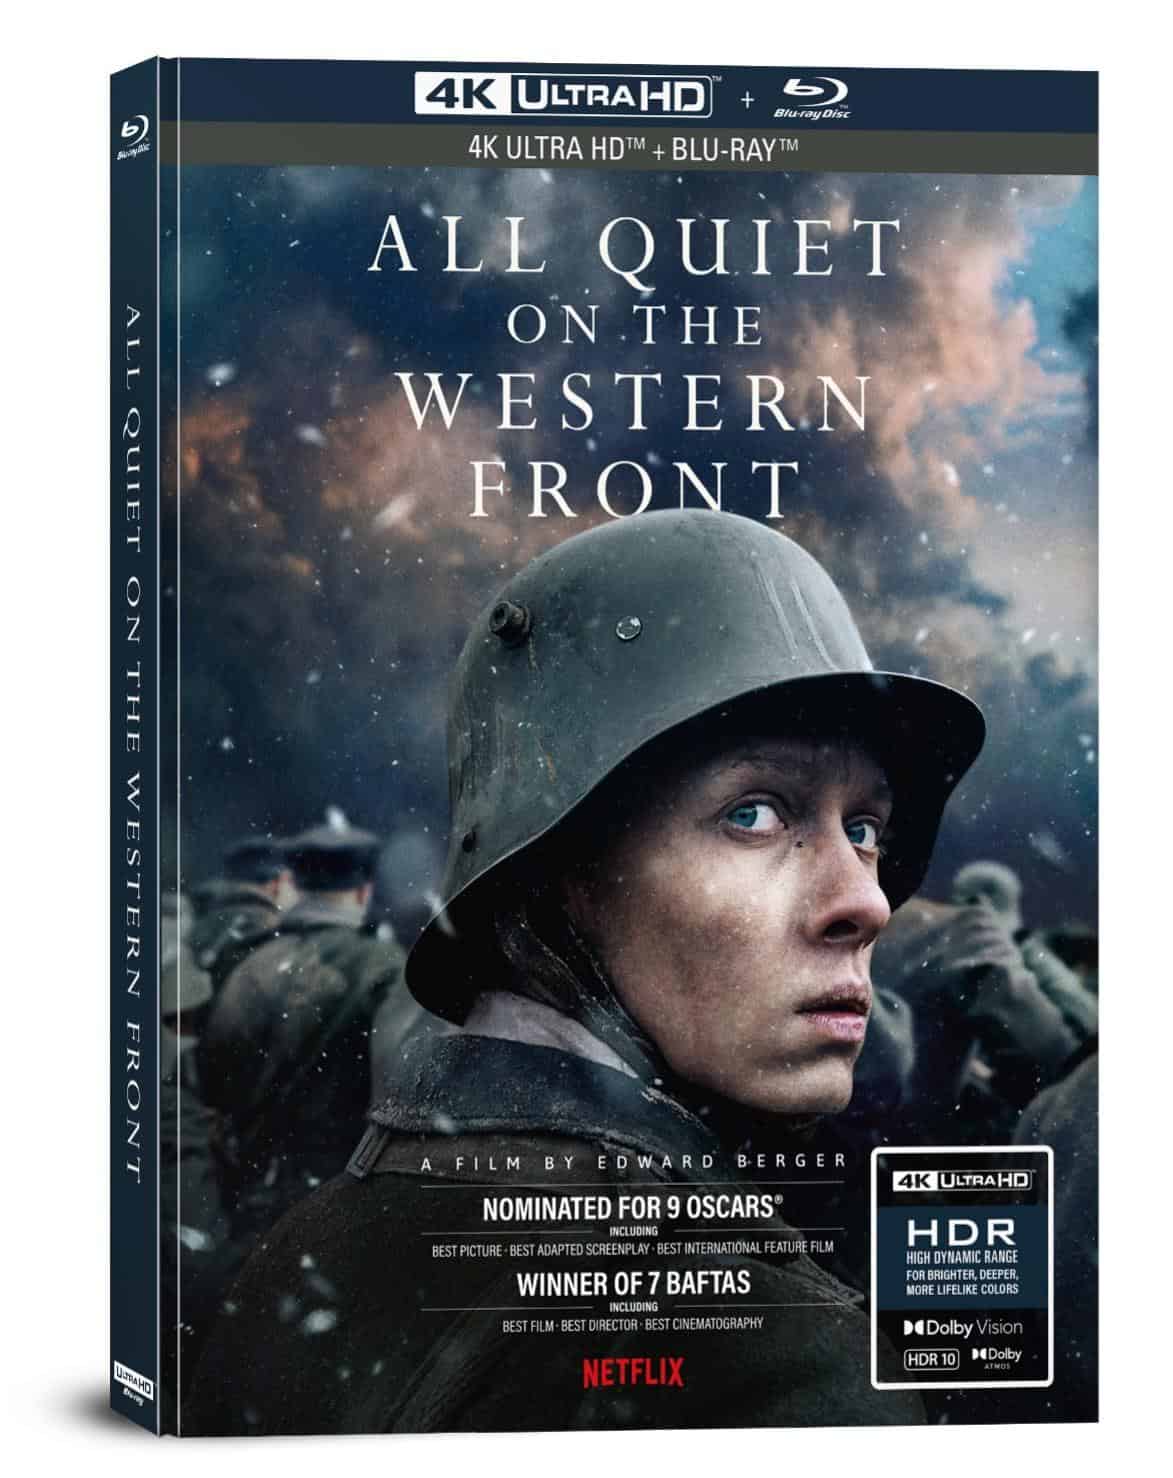 All Quiet On The Western Front" Receives 4K UHD Release: 2-Disc Limited Collector's Edition Media Book on March 28th 19